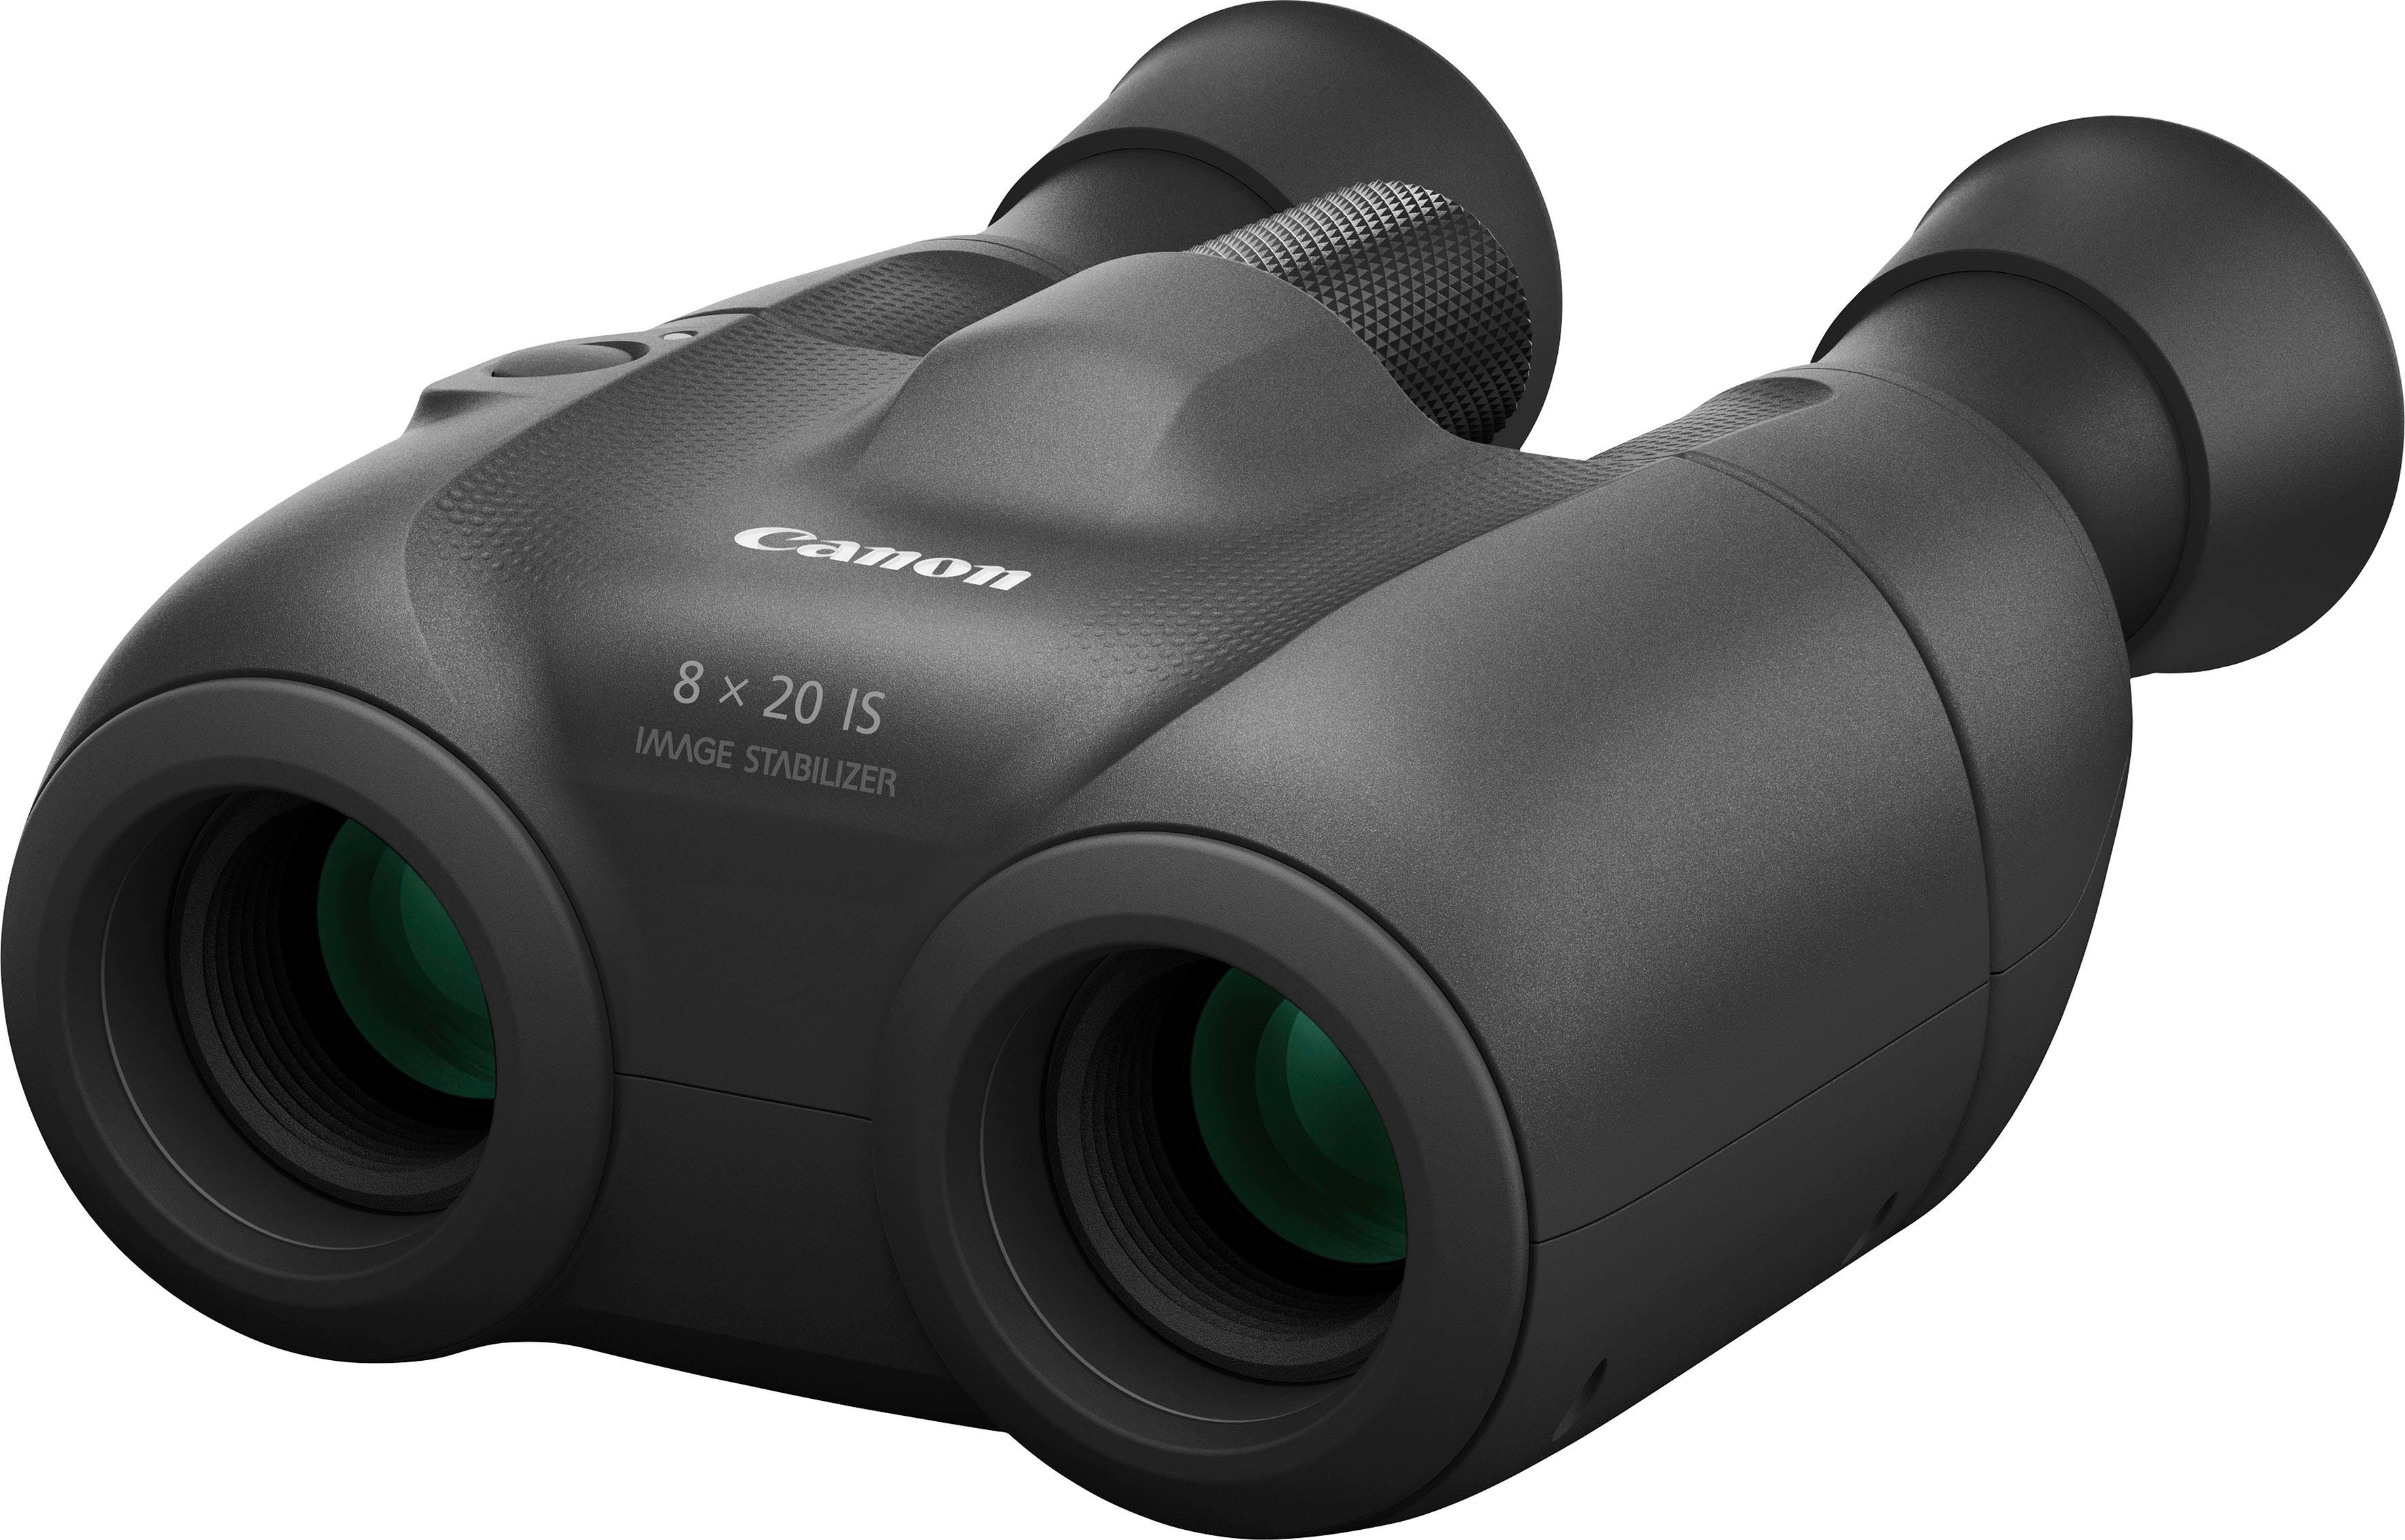 IS Canon 8x20 Fernglas